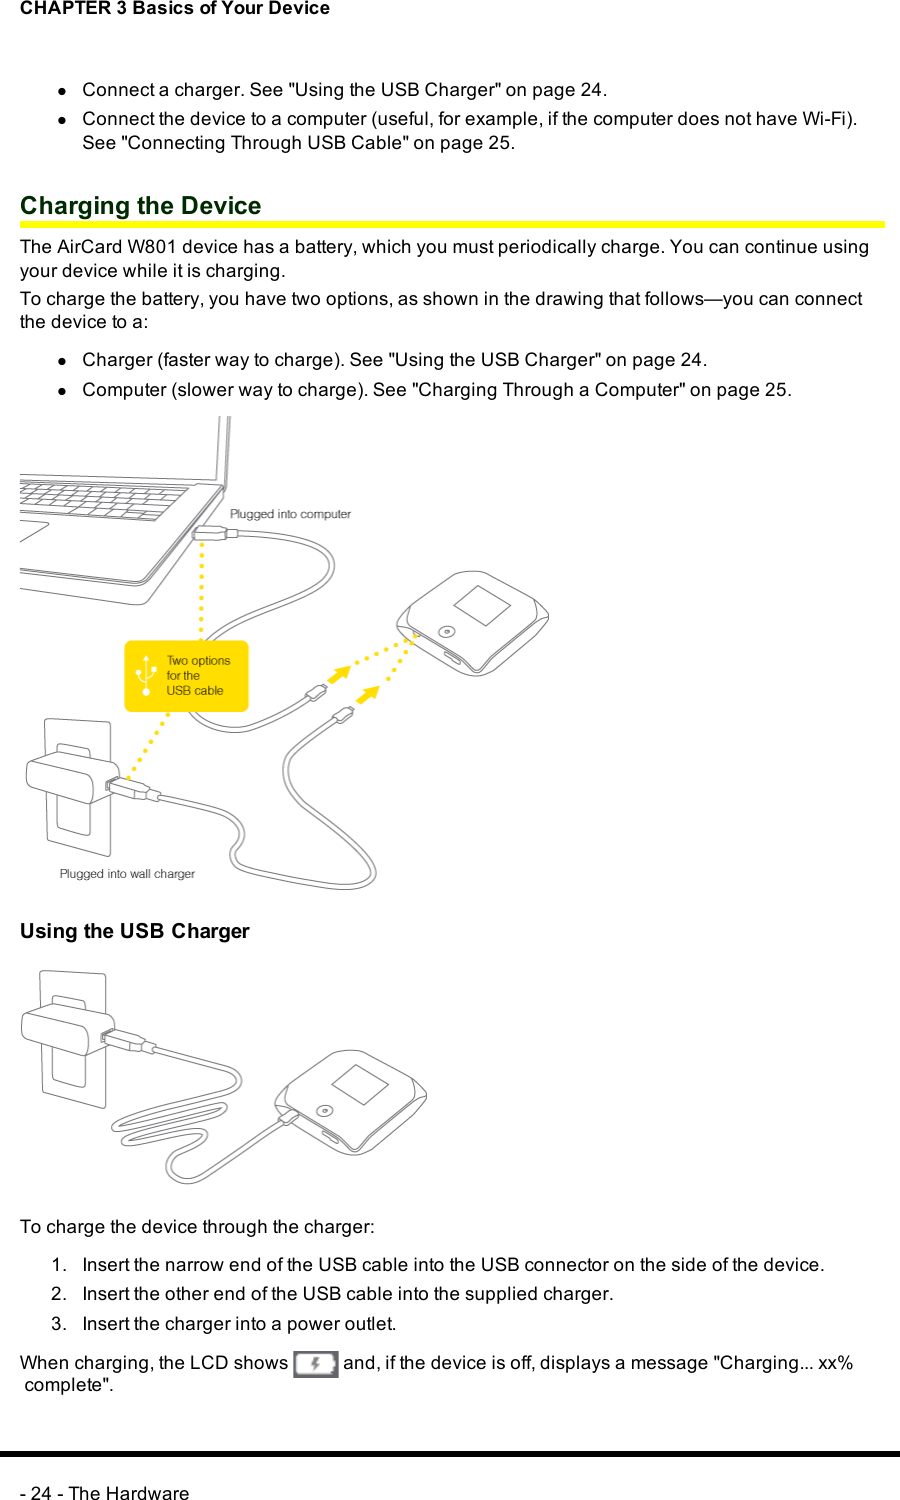 CHAPTER 3 Basics of Your DevicelConnect a charger. See &quot;Using the USB Charger&quot; on page 24.lConnect the device to a computer (useful, for example, if the computer does not have Wi-Fi).See &quot;Connecting Through USB Cable&quot; on page 25.Charging the DeviceThe AirCard W801 device has a battery, which you must periodically charge. You can continue usingyour device while it is charging.To charge the battery, you have two options, as shown in the drawing that follows—you can connectthe device to a:lCharger (faster way to charge). See &quot;Using the USB Charger&quot; on page 24.lComputer (slower way to charge). See &quot;Charging Through a Computer&quot; on page 25.Using the USB ChargerTo charge the device through the charger:1. Insert the narrow end of the USB cable into the USBconnector on the side of the device.2. Insert the other end of the USB cable into the supplied charger.3. Insert the charger into a power outlet.When charging, the LCDshows and, if the device is off, displays a message &quot;Charging... xx%complete&quot;.- 24 - The Hardware